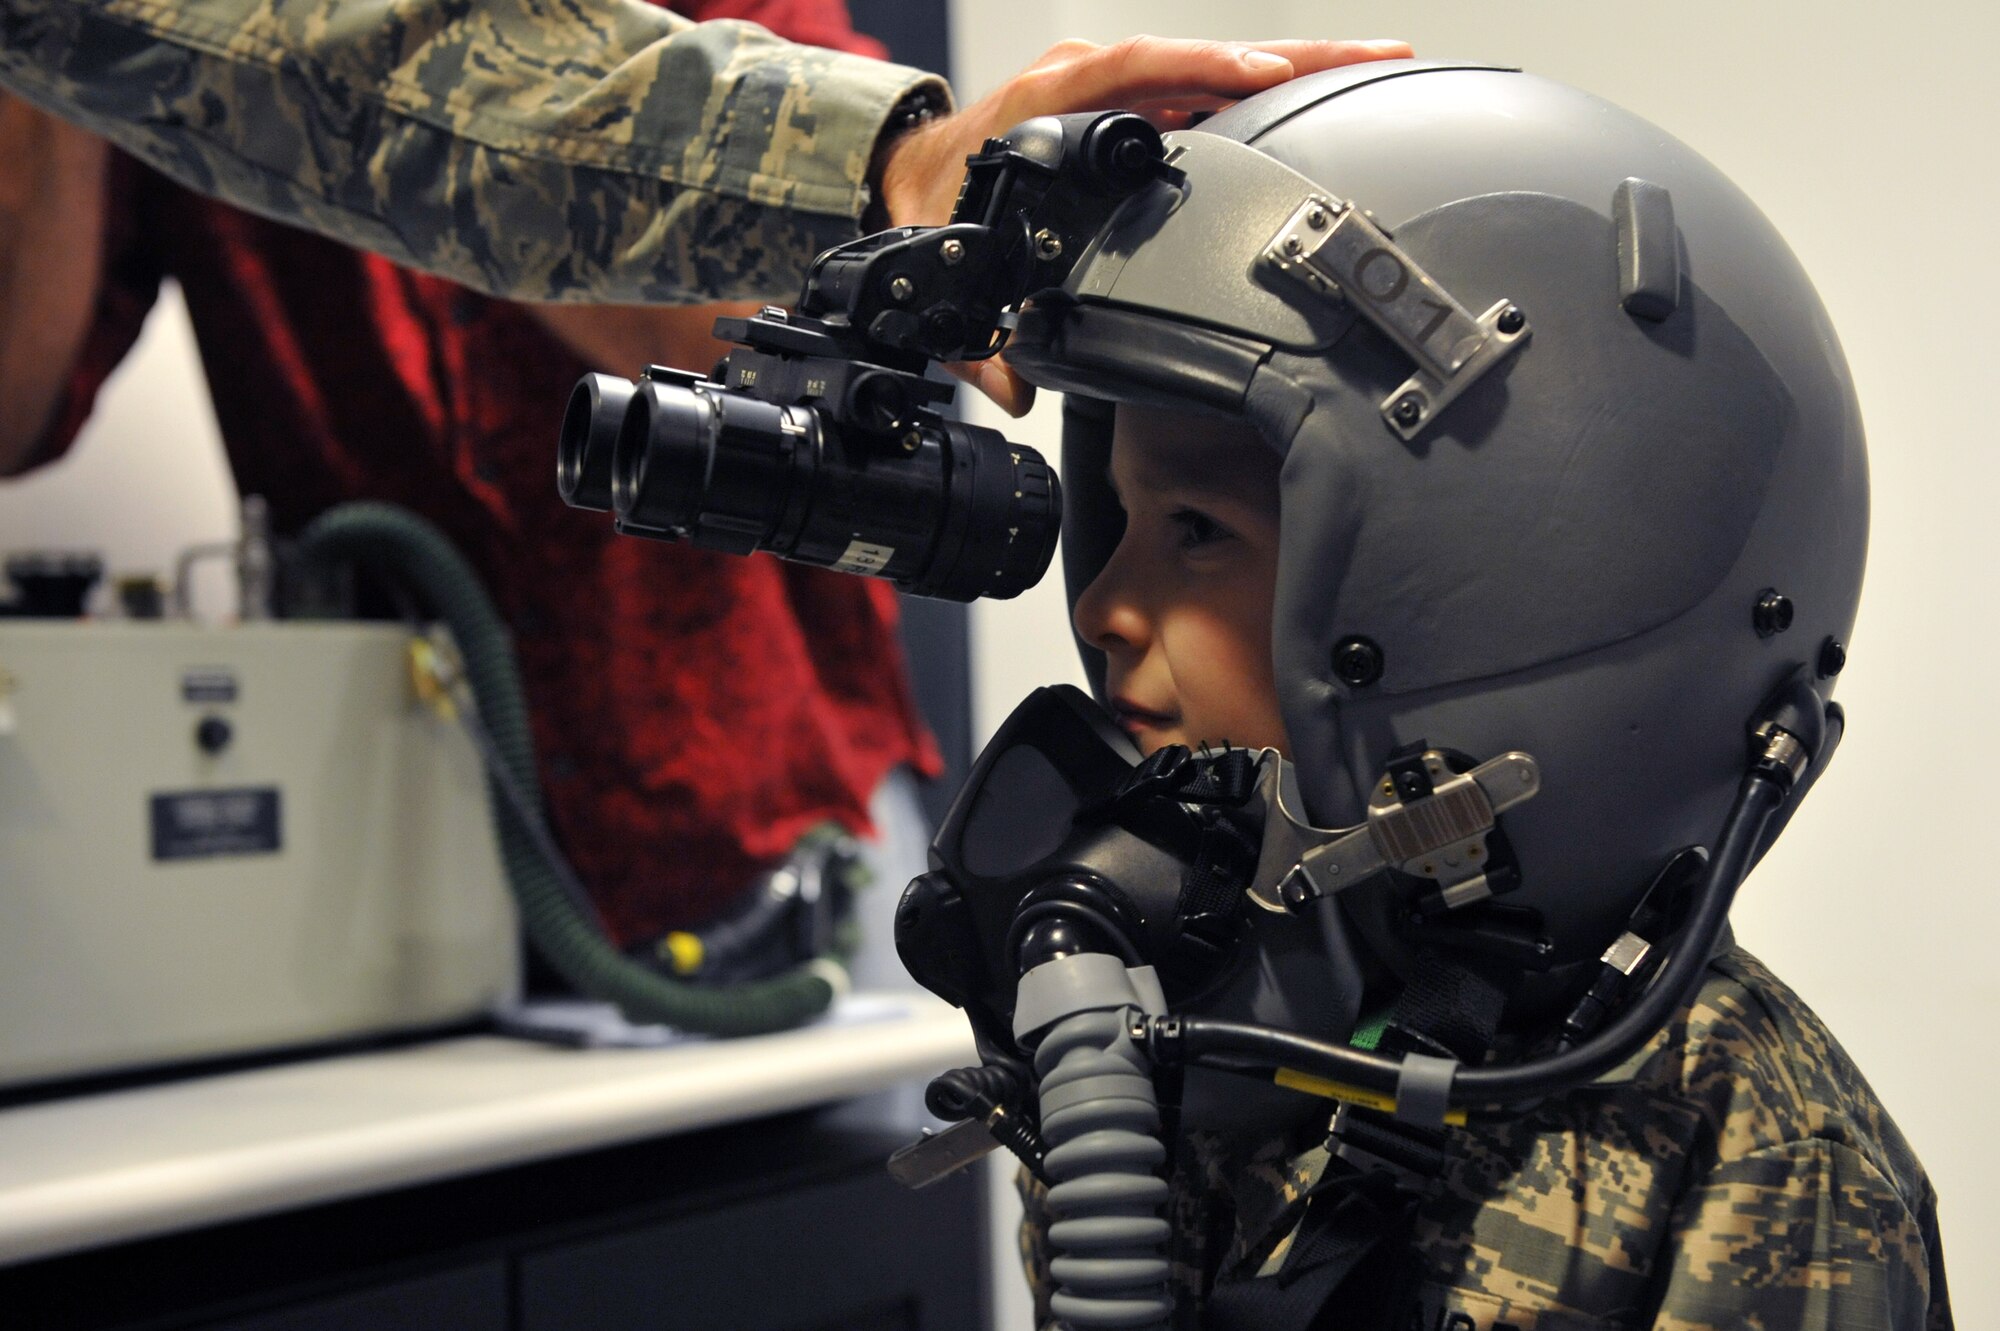 Keegan Stipe, left, a 7-year-old boy who is overcoming transverse myelitis, a spinal condition that limits his ability to walk, tries on pilot gear during his Airman for a Day base tour Aug. 26, 2014, on Buckley Air Force Base, Colo. Keegan has always been fascinated with fast planes, loud guns and the military lifestyle, so the 460th Space Wing gave him and his parents the opportunity to visit the base. On his tour, he visited the 140th Wing, Air National Guard and various 460th SFS sections. (U.S. Air Force photo by Airman Emily E. Amyotte/Released)